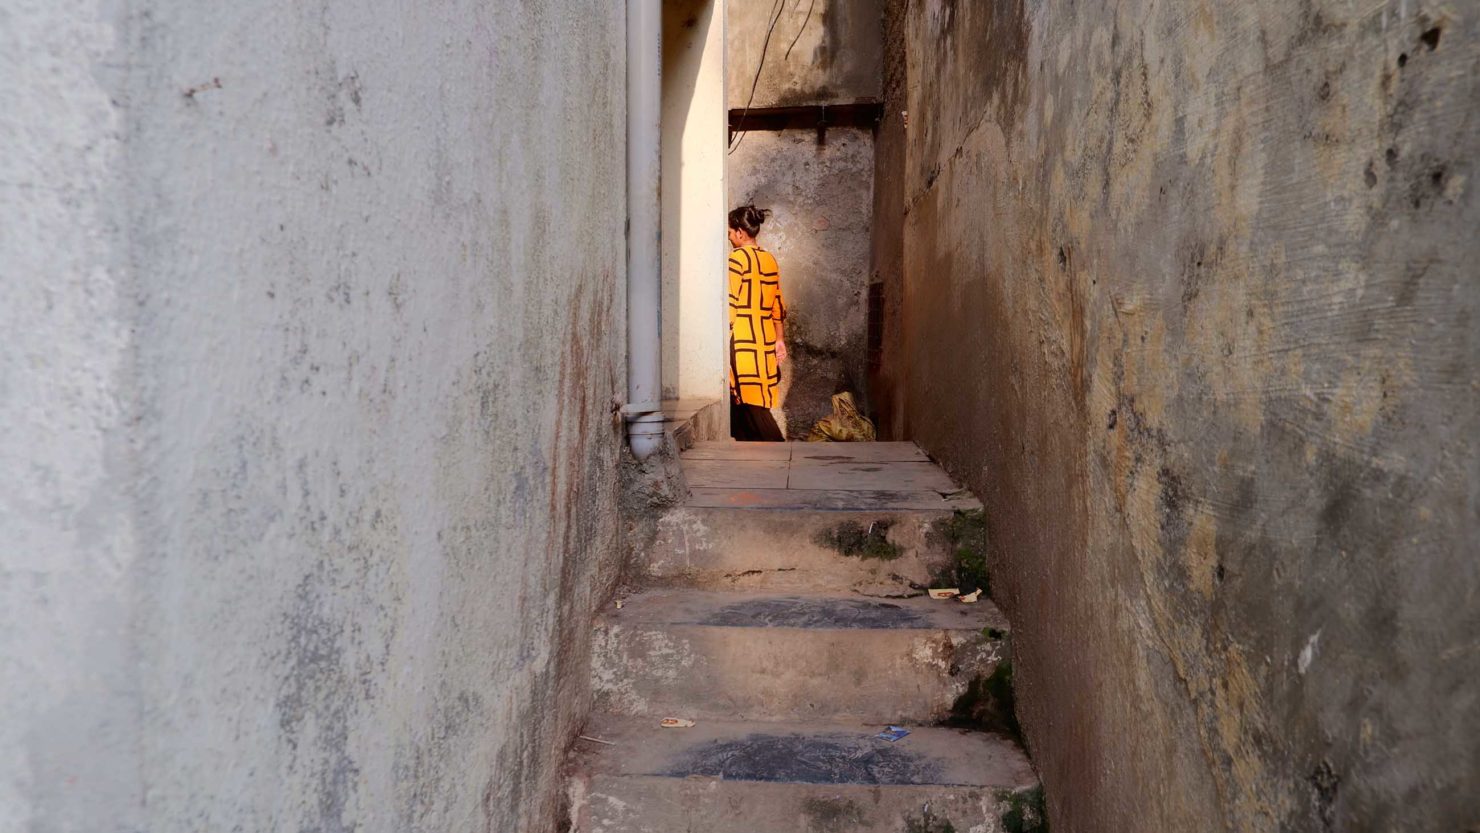 For Many Indian Women, Lack of Toilet Access Poses Health Risks